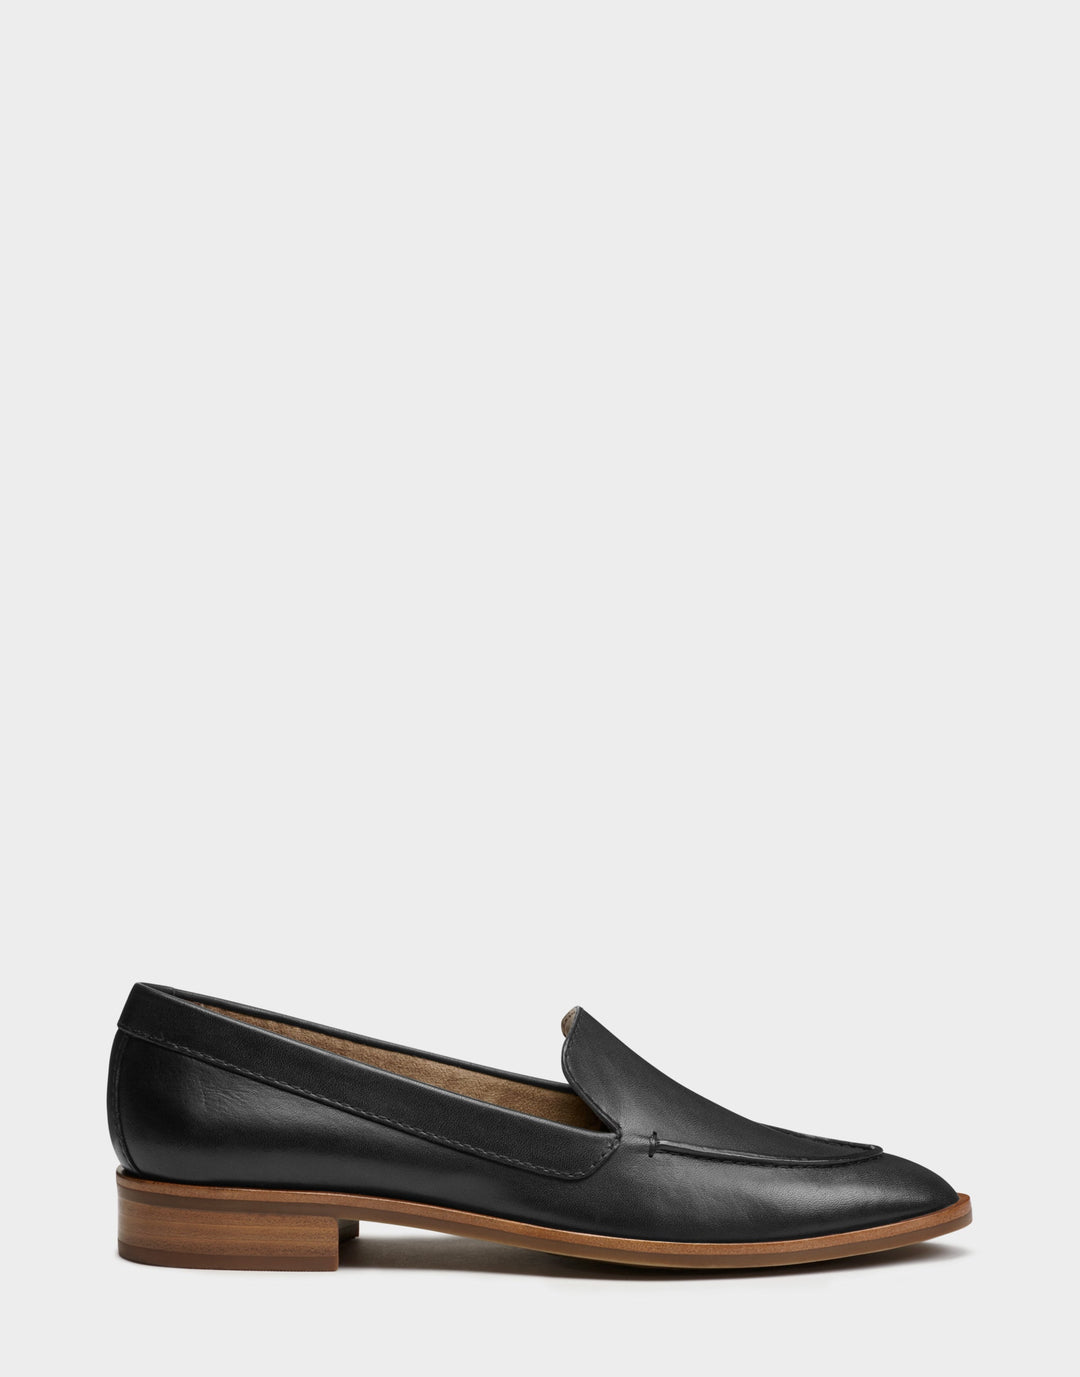 East Side - comfortable women's loafers in black